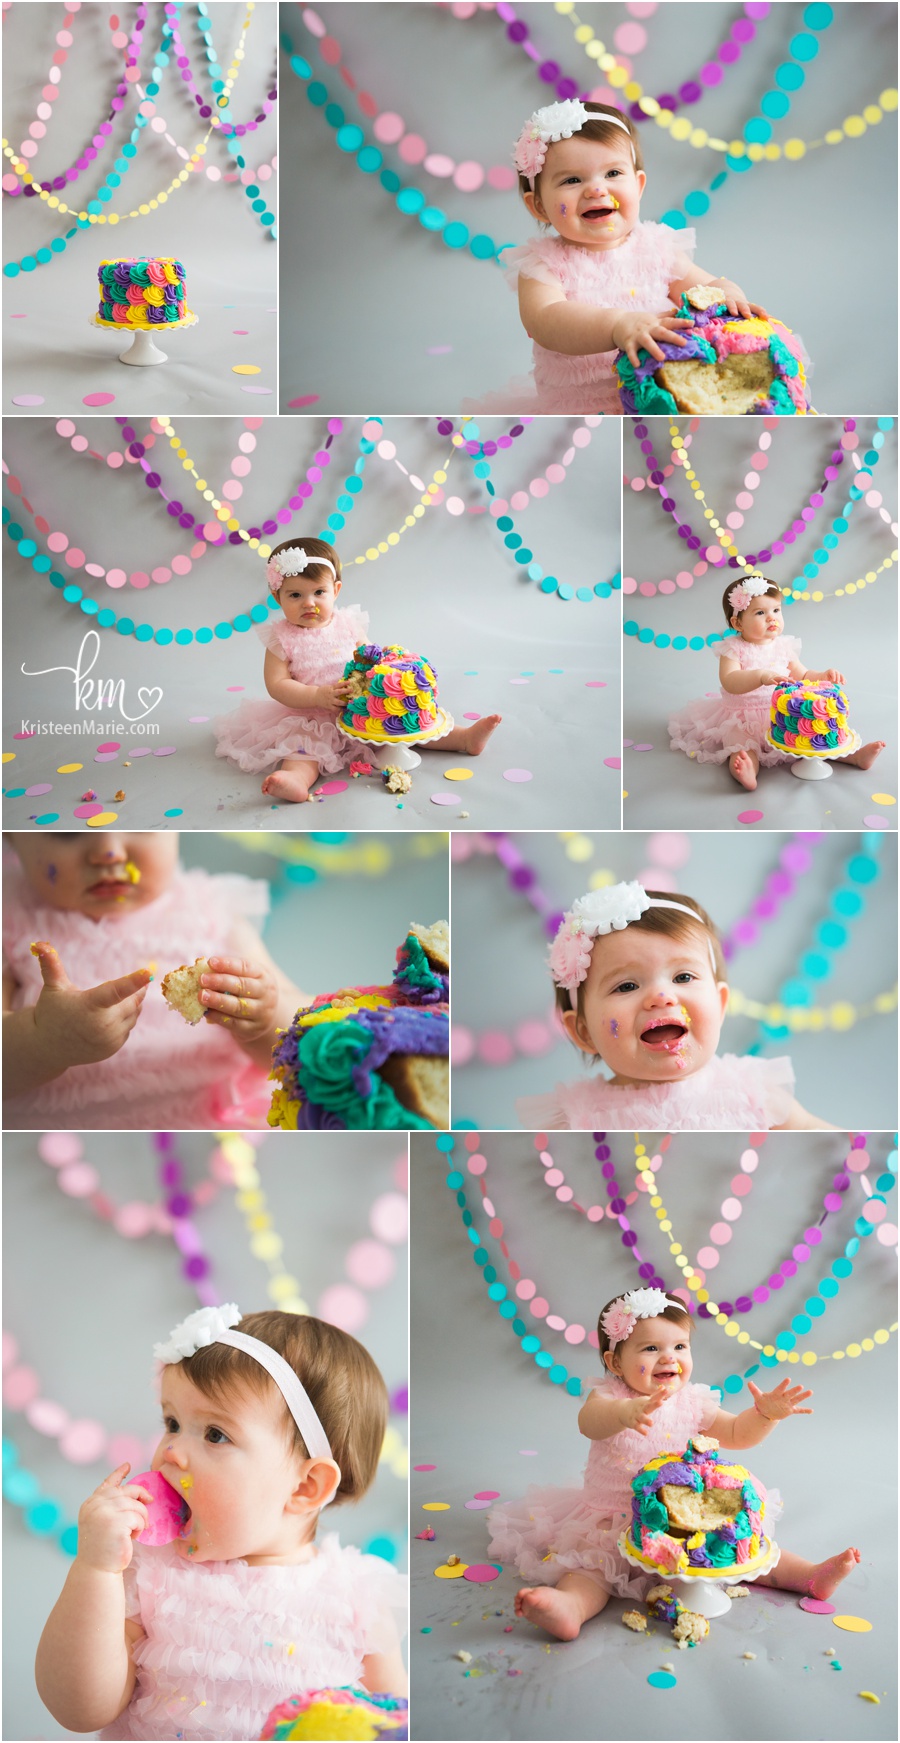 colorful cake smash session - teal, pink, yellow, and purple - 1st birthday cake smash for baby's 1st birthday party